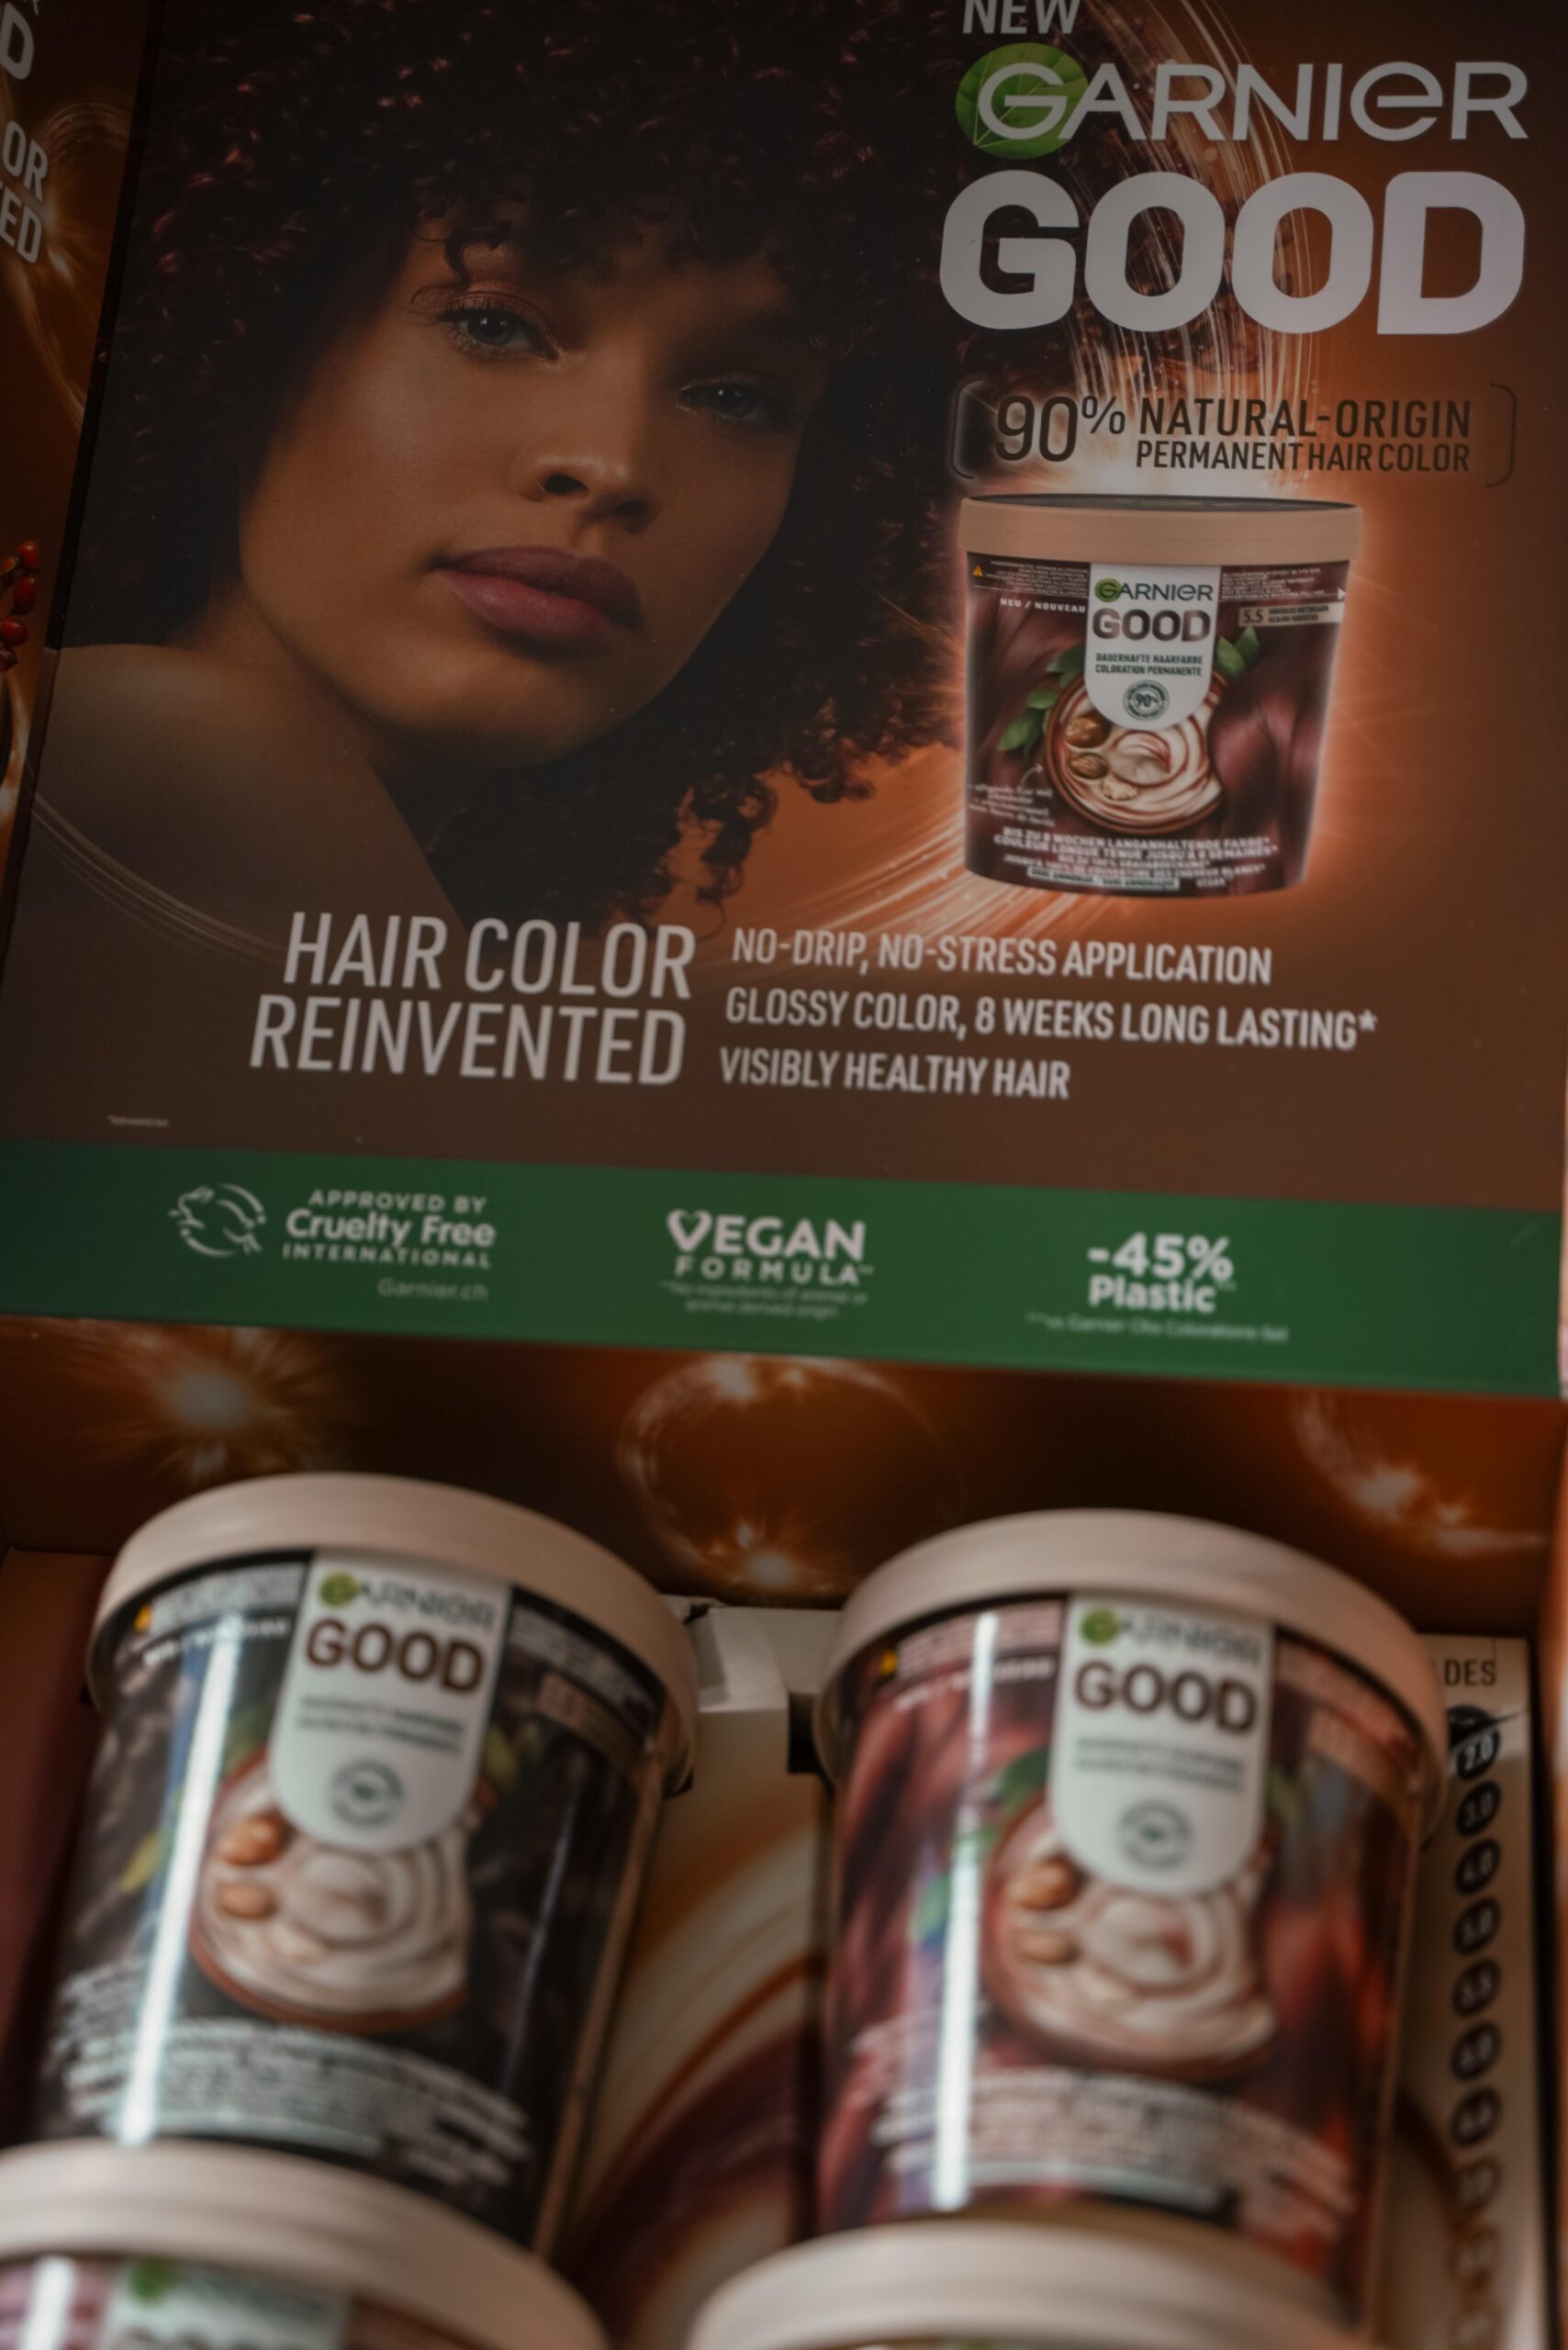 Garnier GOOD Hair Colours - The innovative hair colouring experience | The  Chic Advocate